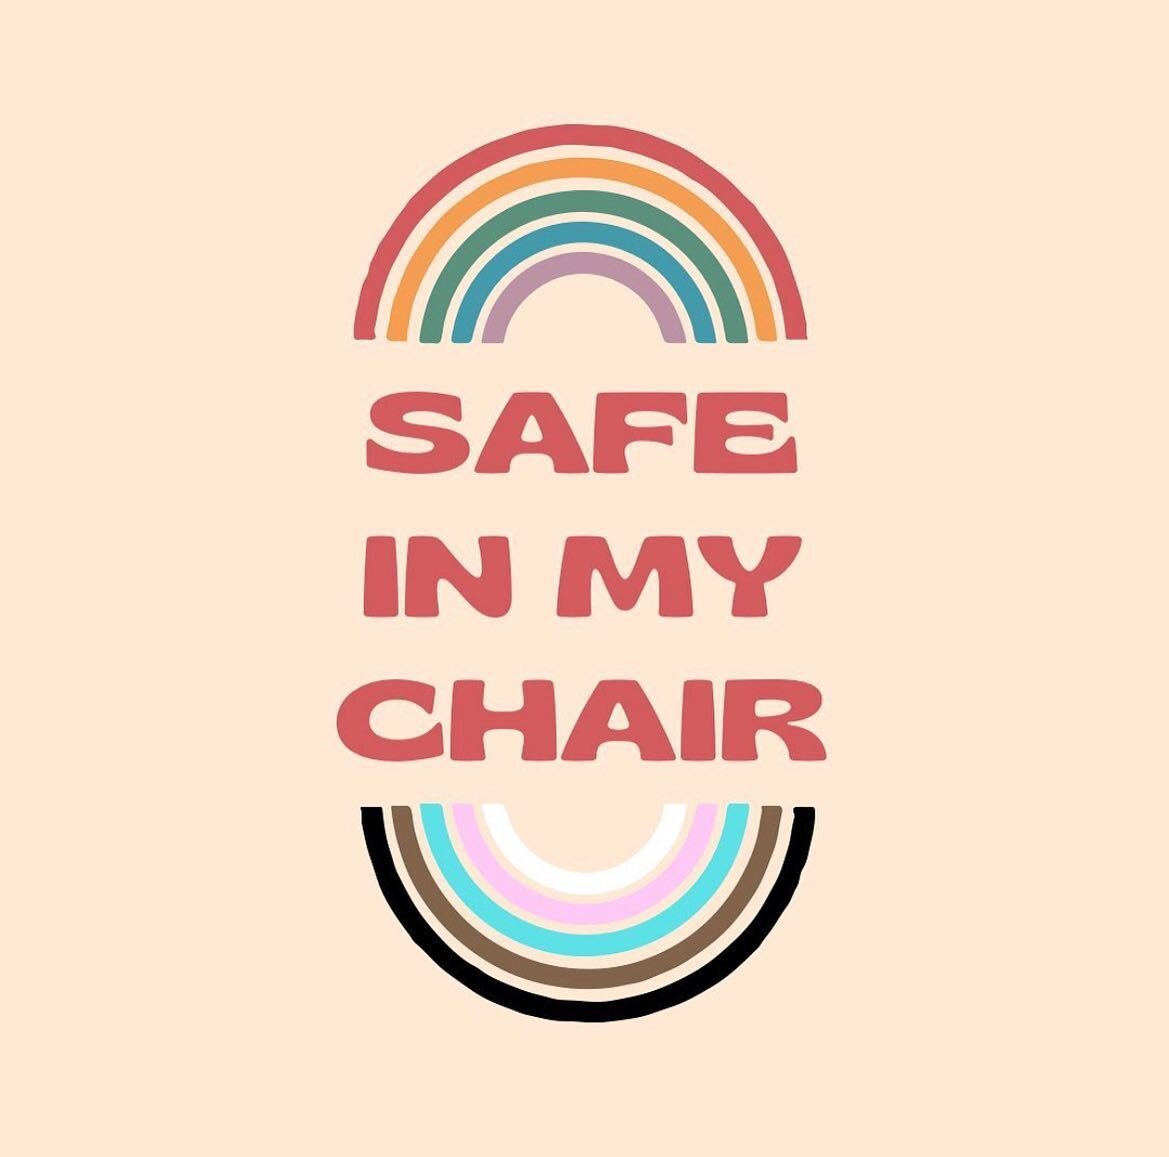 It&rsquo;s important to feel comfortable when sitting in a chair and updating or maintaining your look however you decide to identify. We all just want to feel like the best versions of ourselves. 

Celebrating and supporting the LGBTQIAA community i